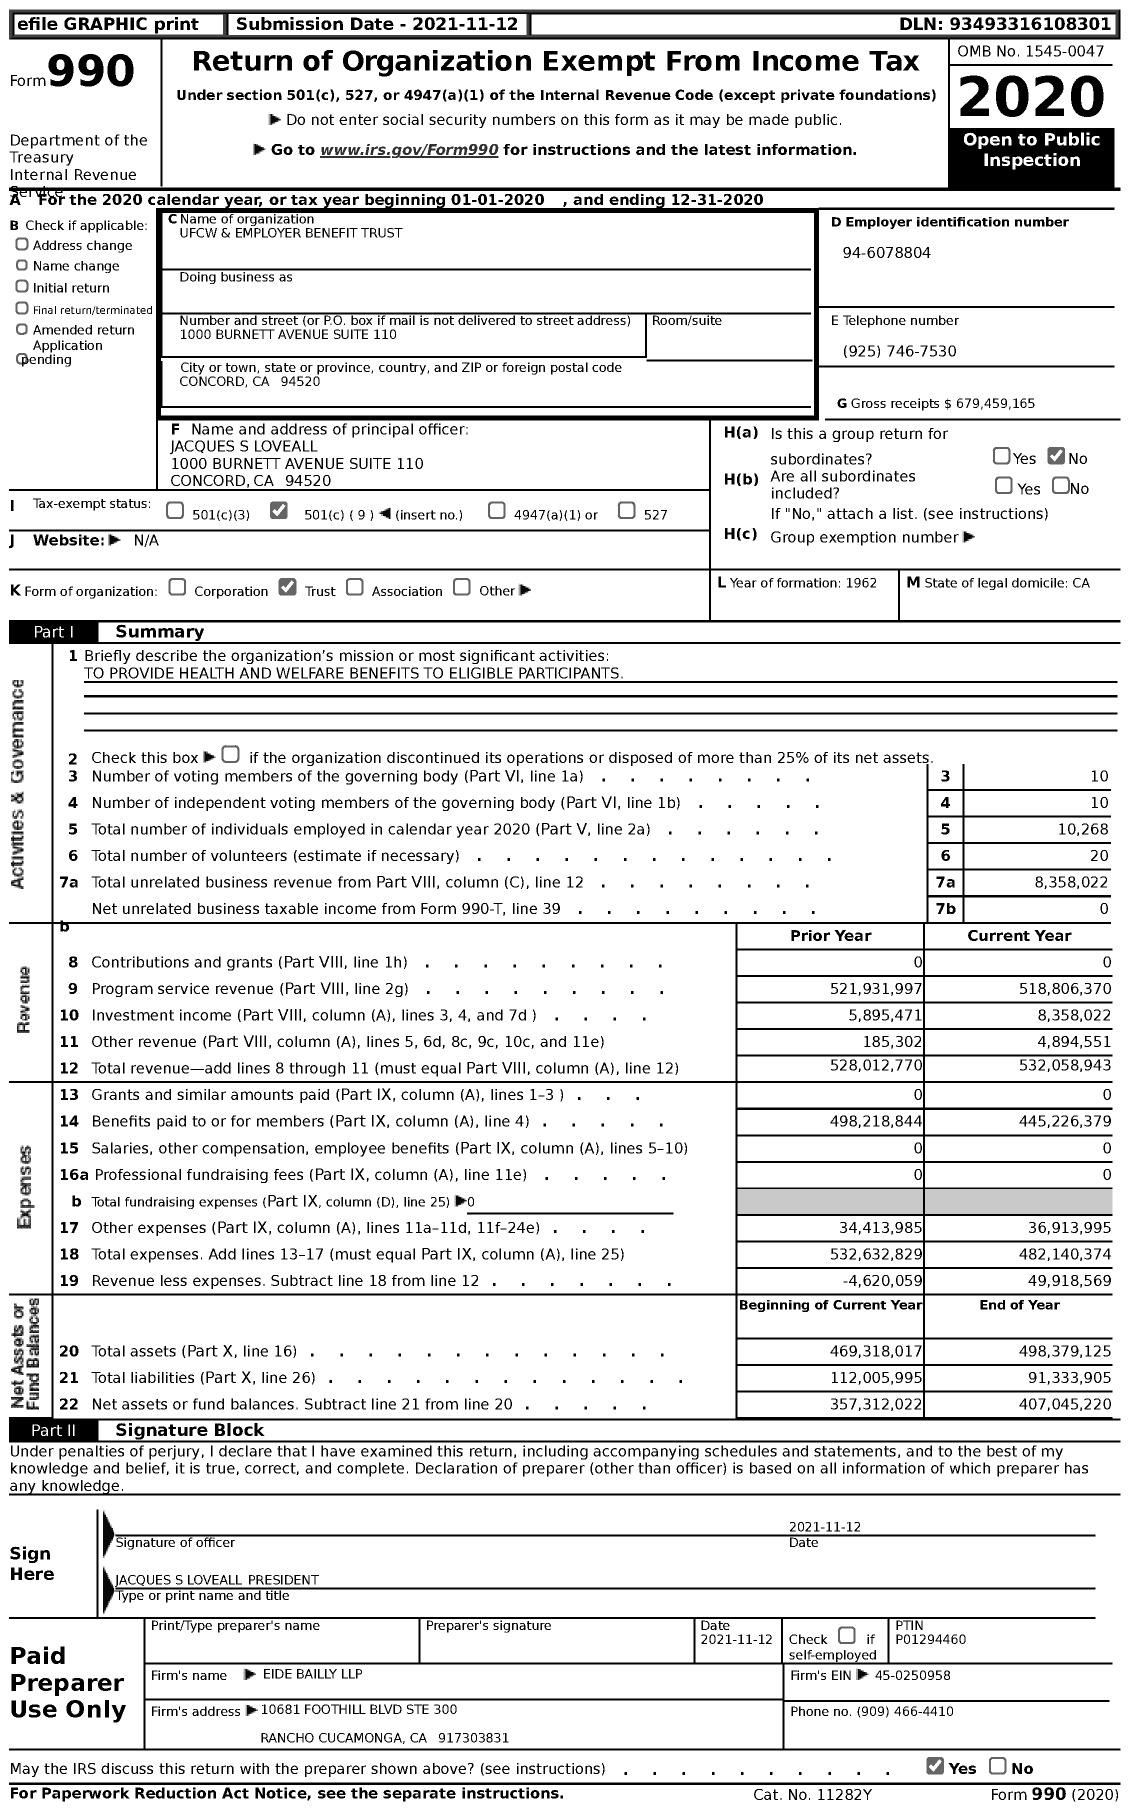 Image of first page of 2020 Form 990 for Ufcw and Employers Benefit Trust